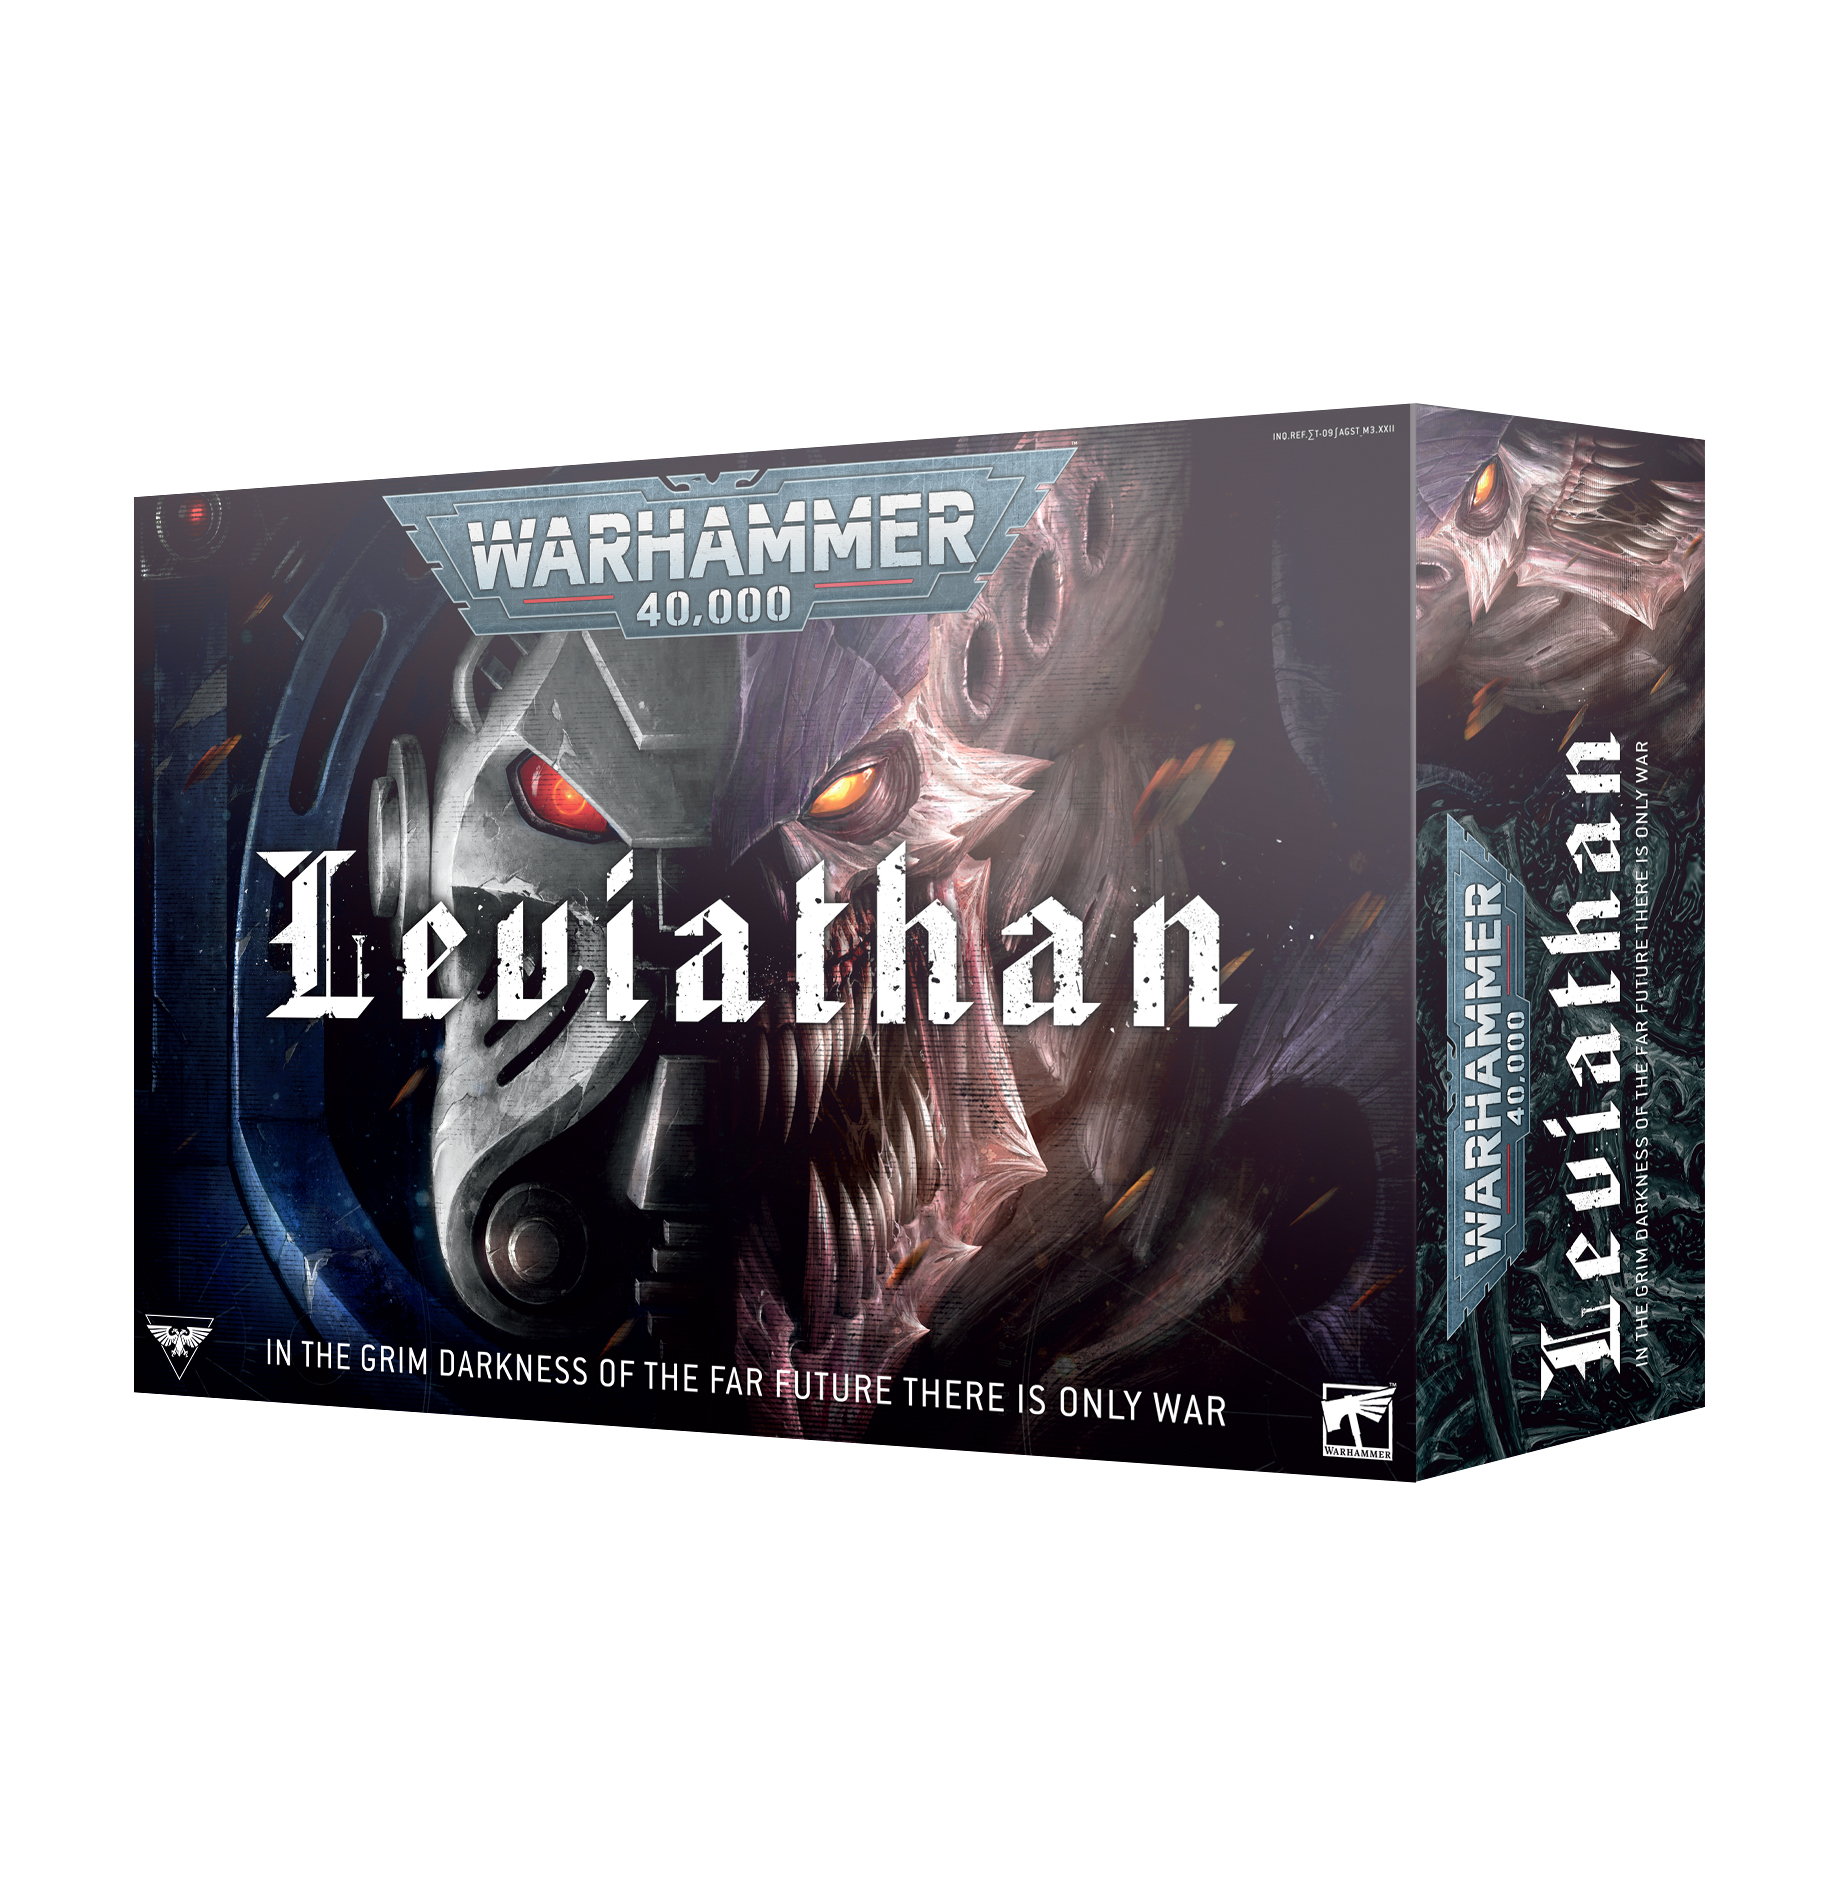 More Warhammer 40K Leviathan sets have been made than any other